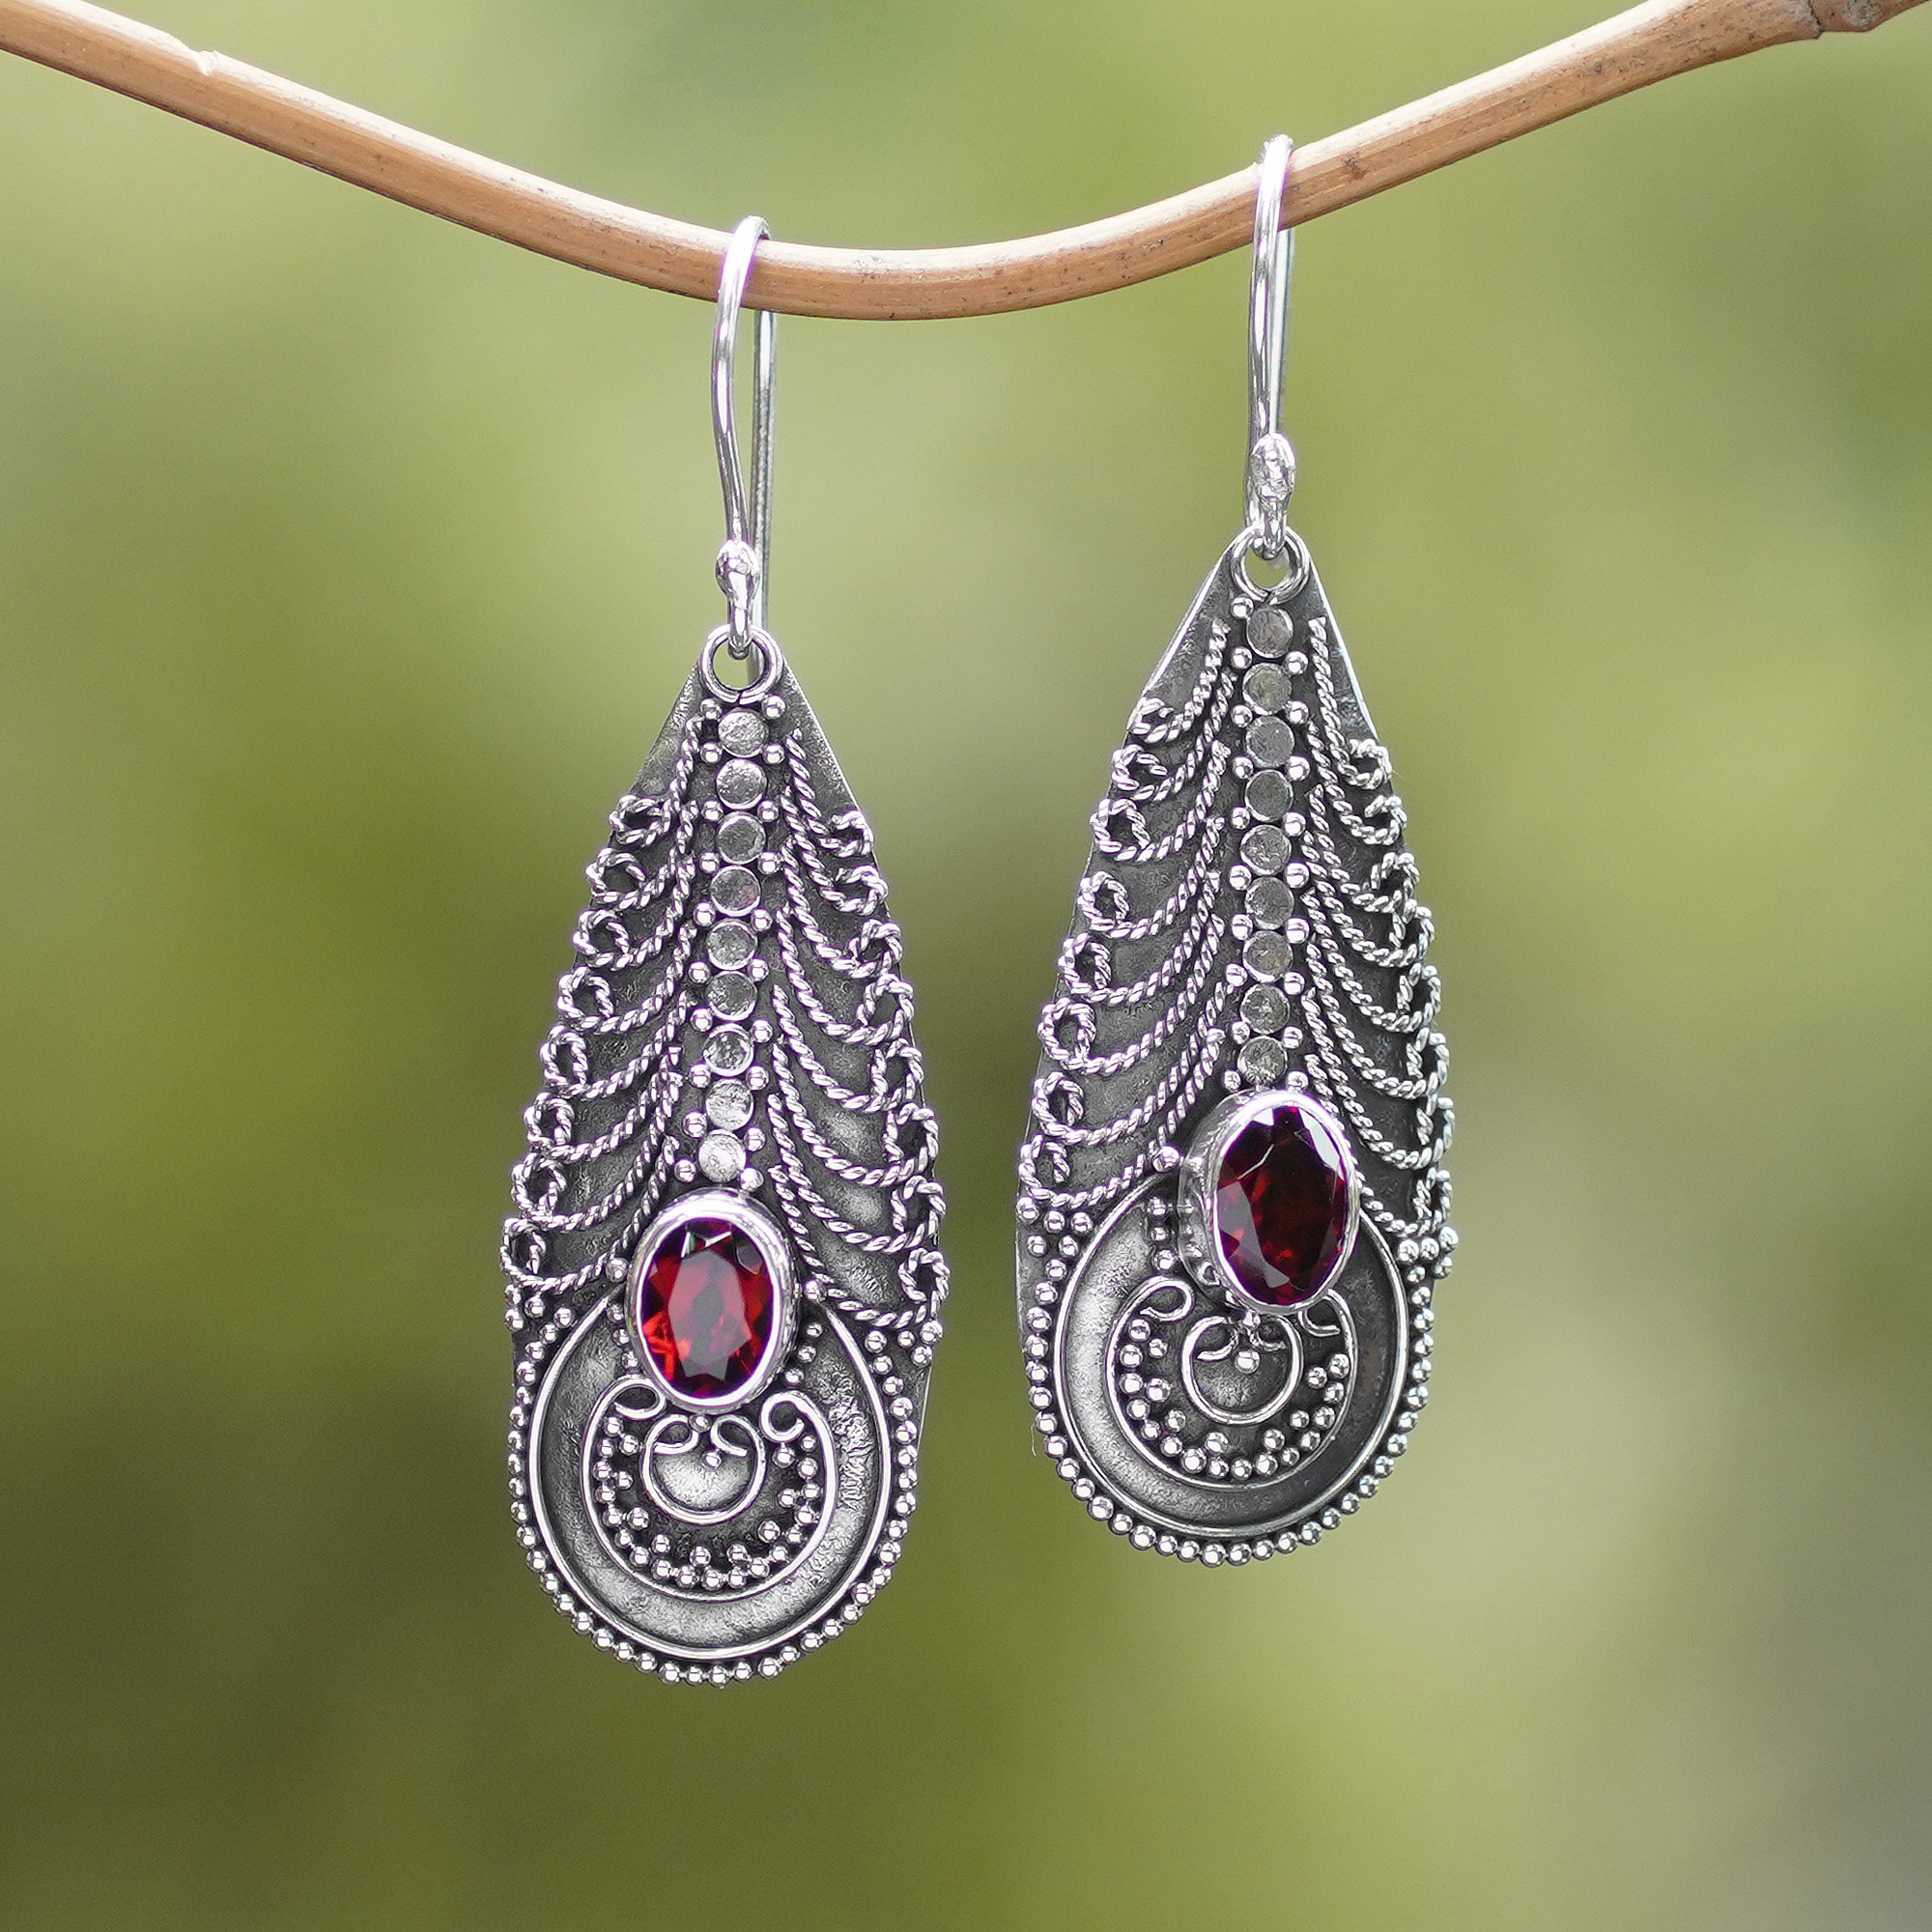 Garnet on Balinese Sterling Silver Earrings Crafted by Hand - Temple Art |  NOVICA